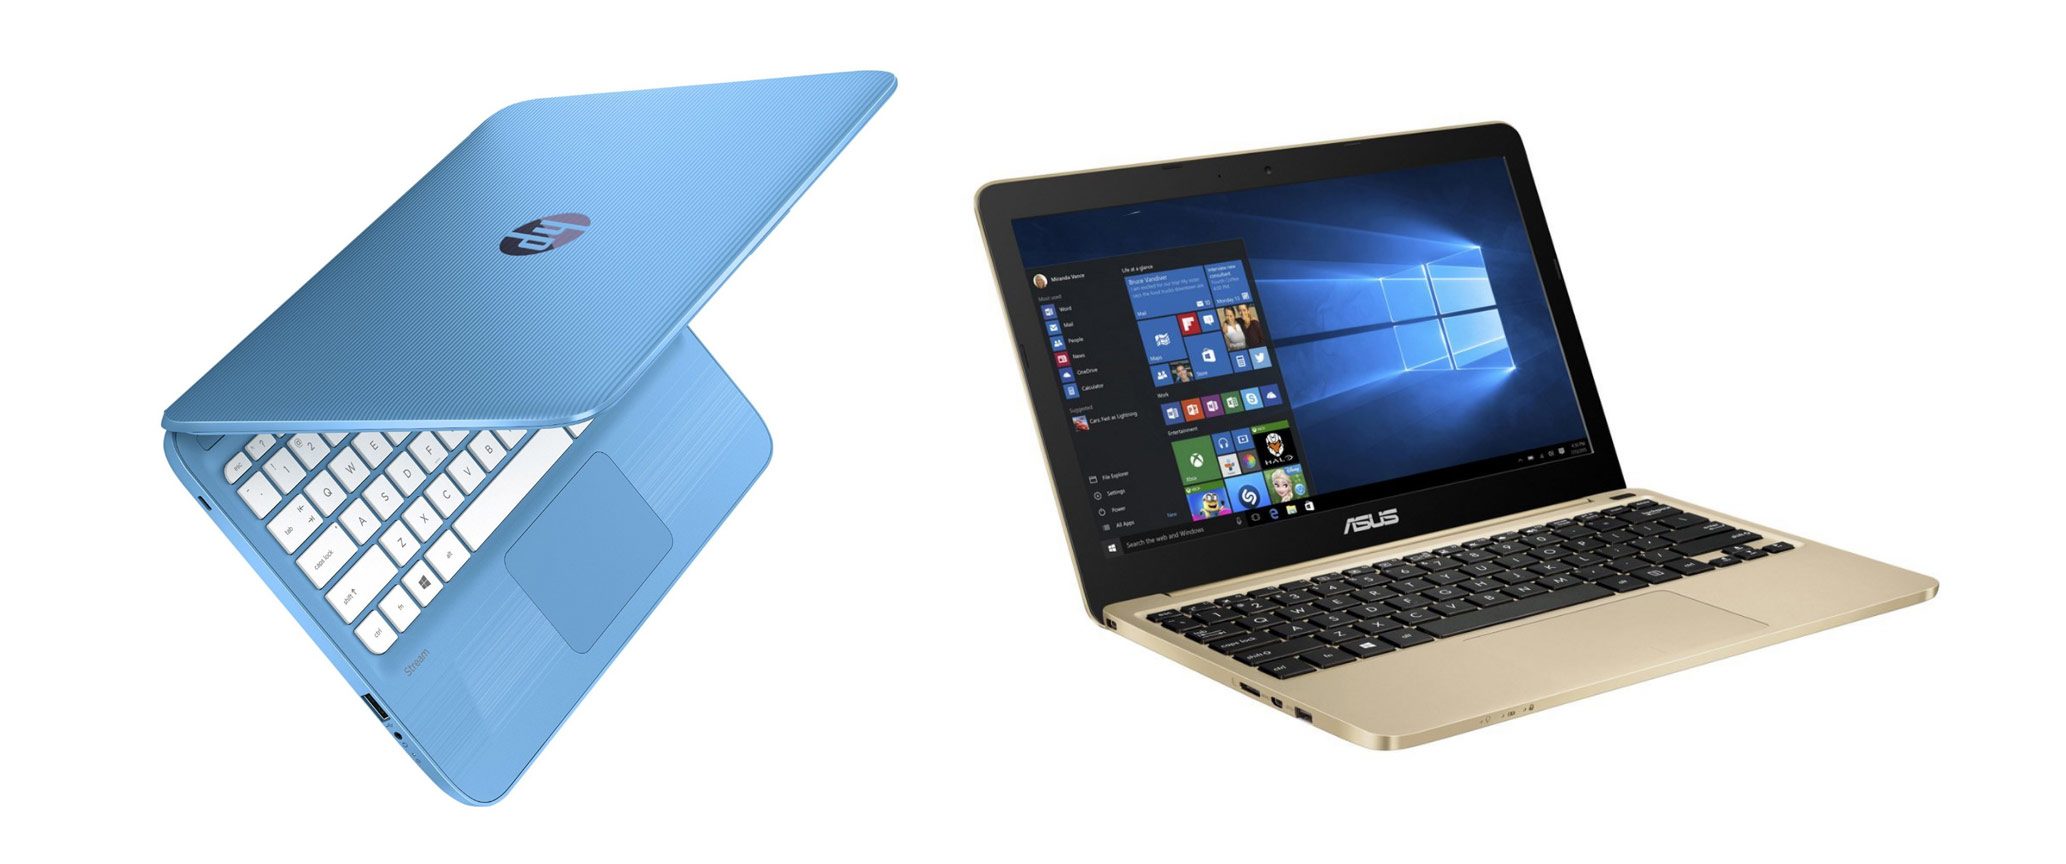 The HP Stream 11 and the Asus Vivobook E200 are excellent Windows laptops you can have for under $200